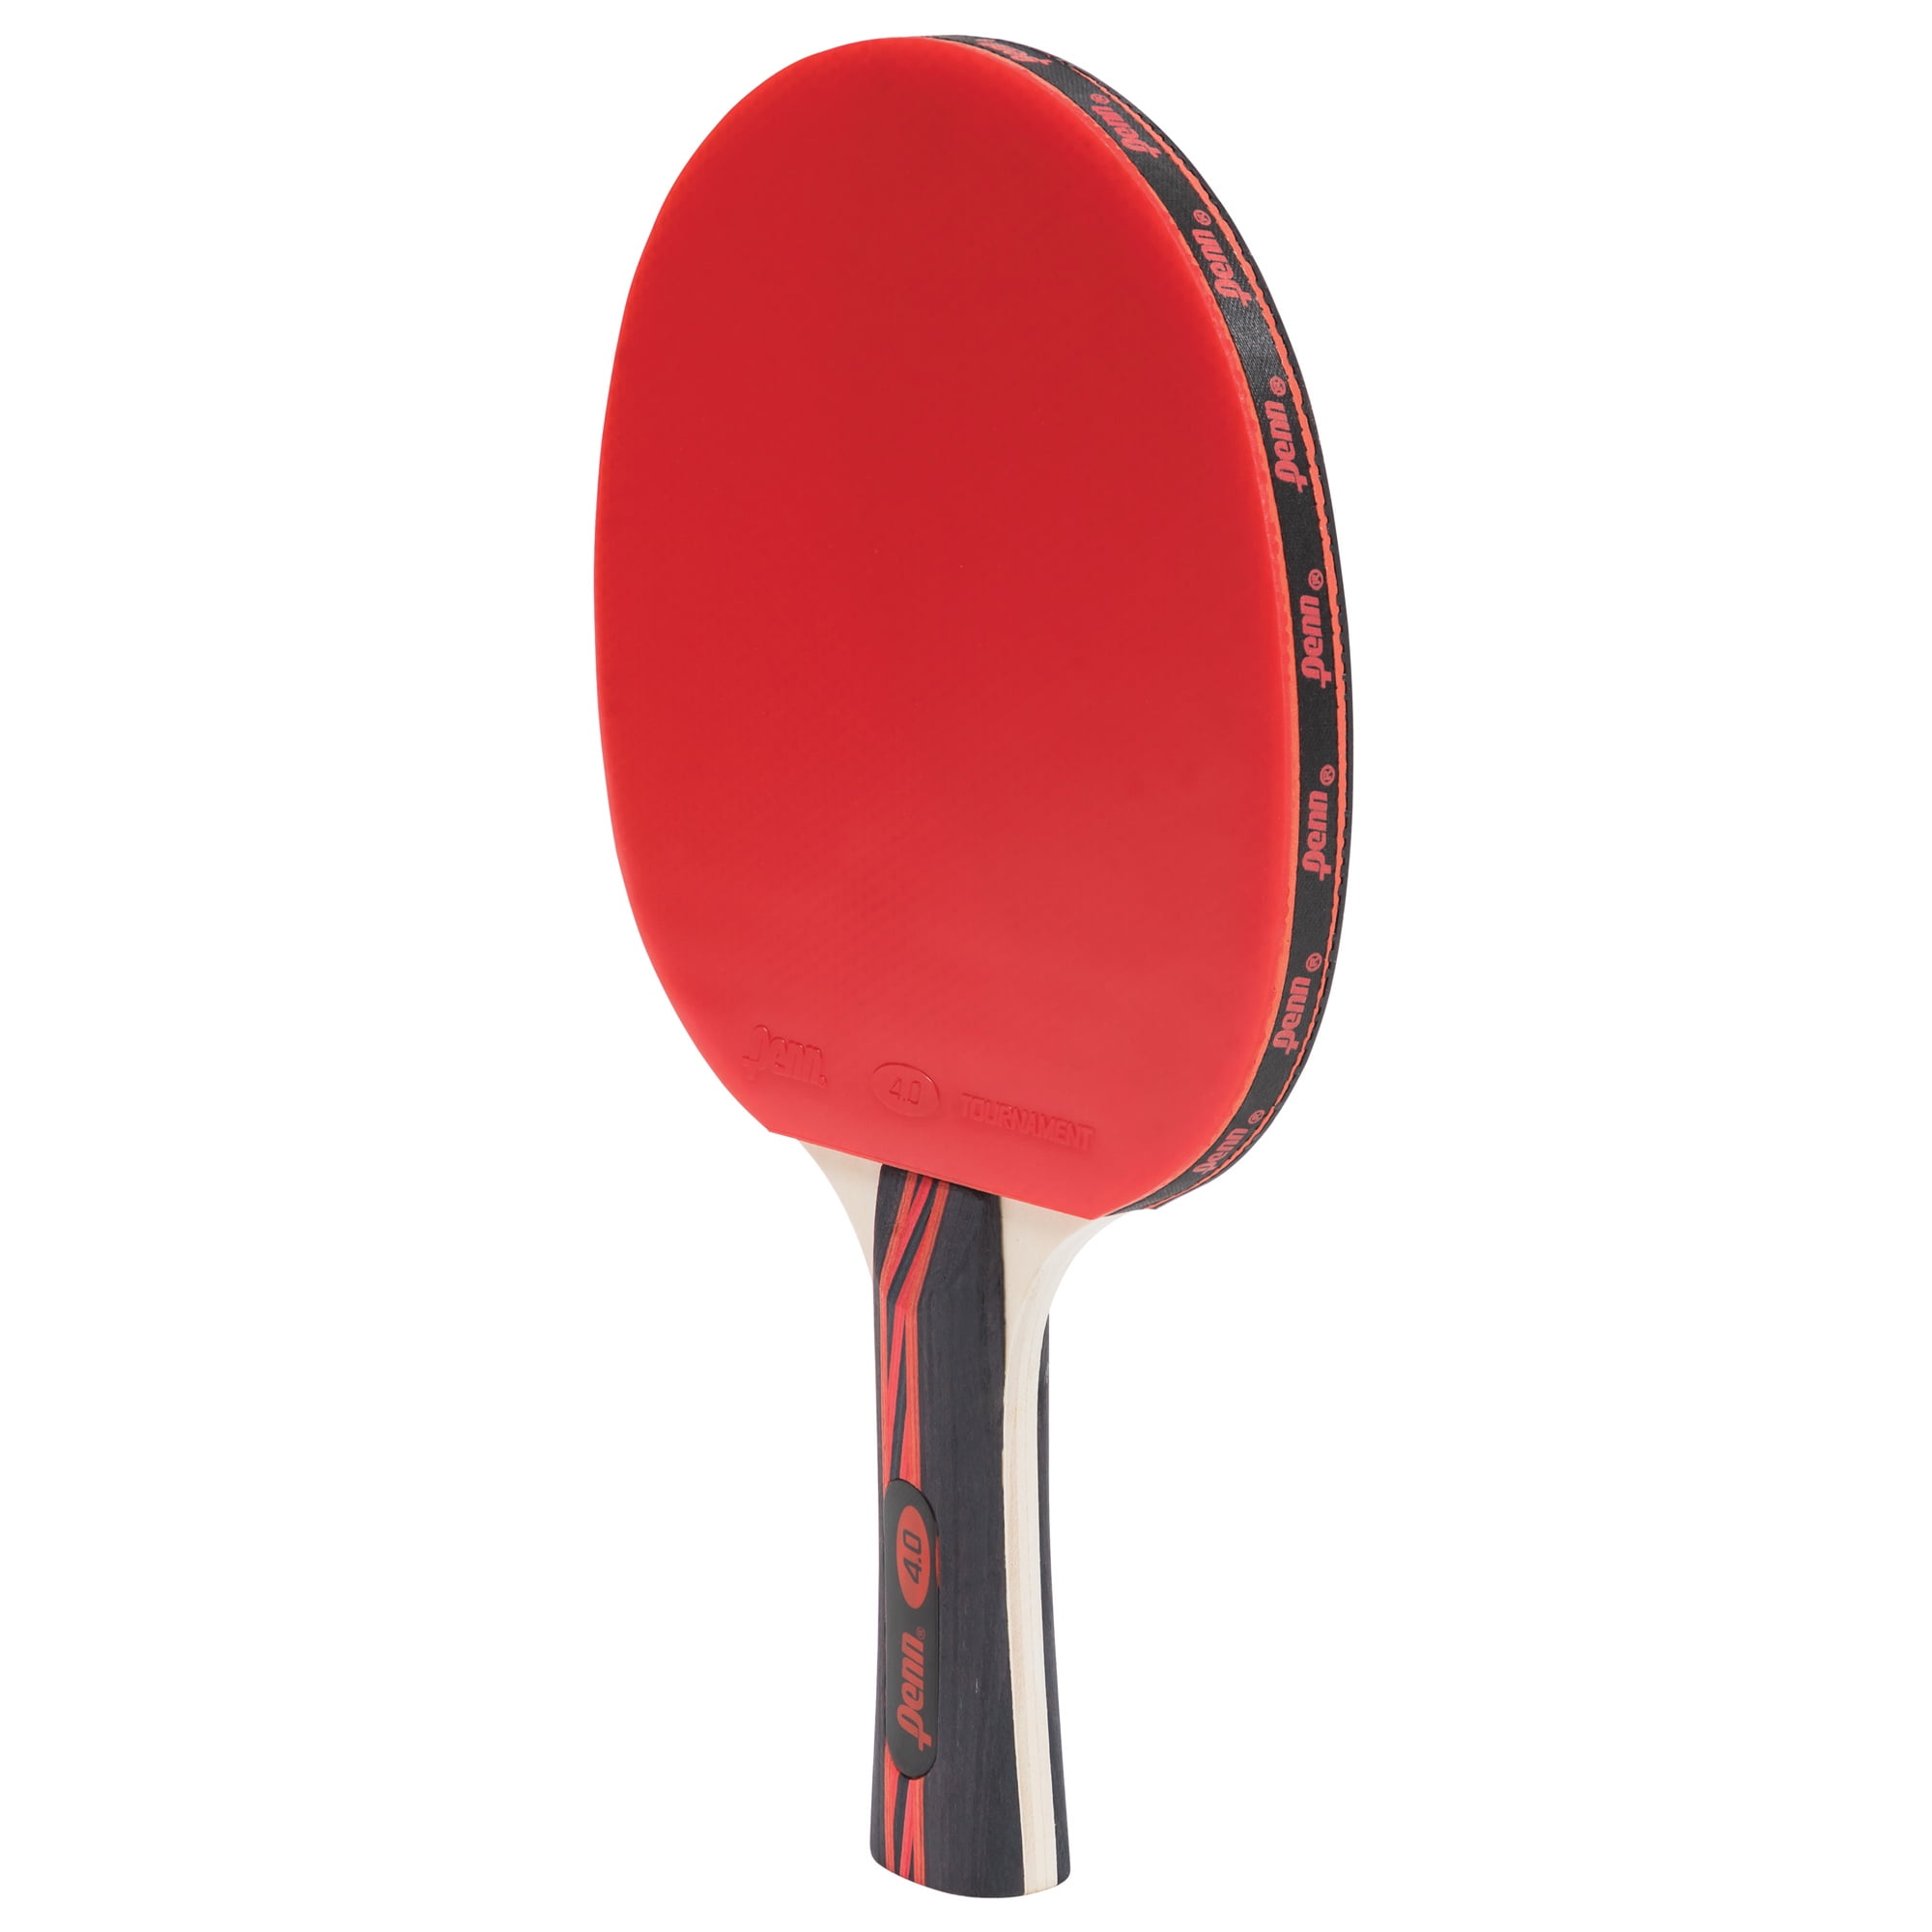 Nibiru Sport 4 Paddles and 8 ABS Tournament Sport Balls Ping Pong Set for sale online 